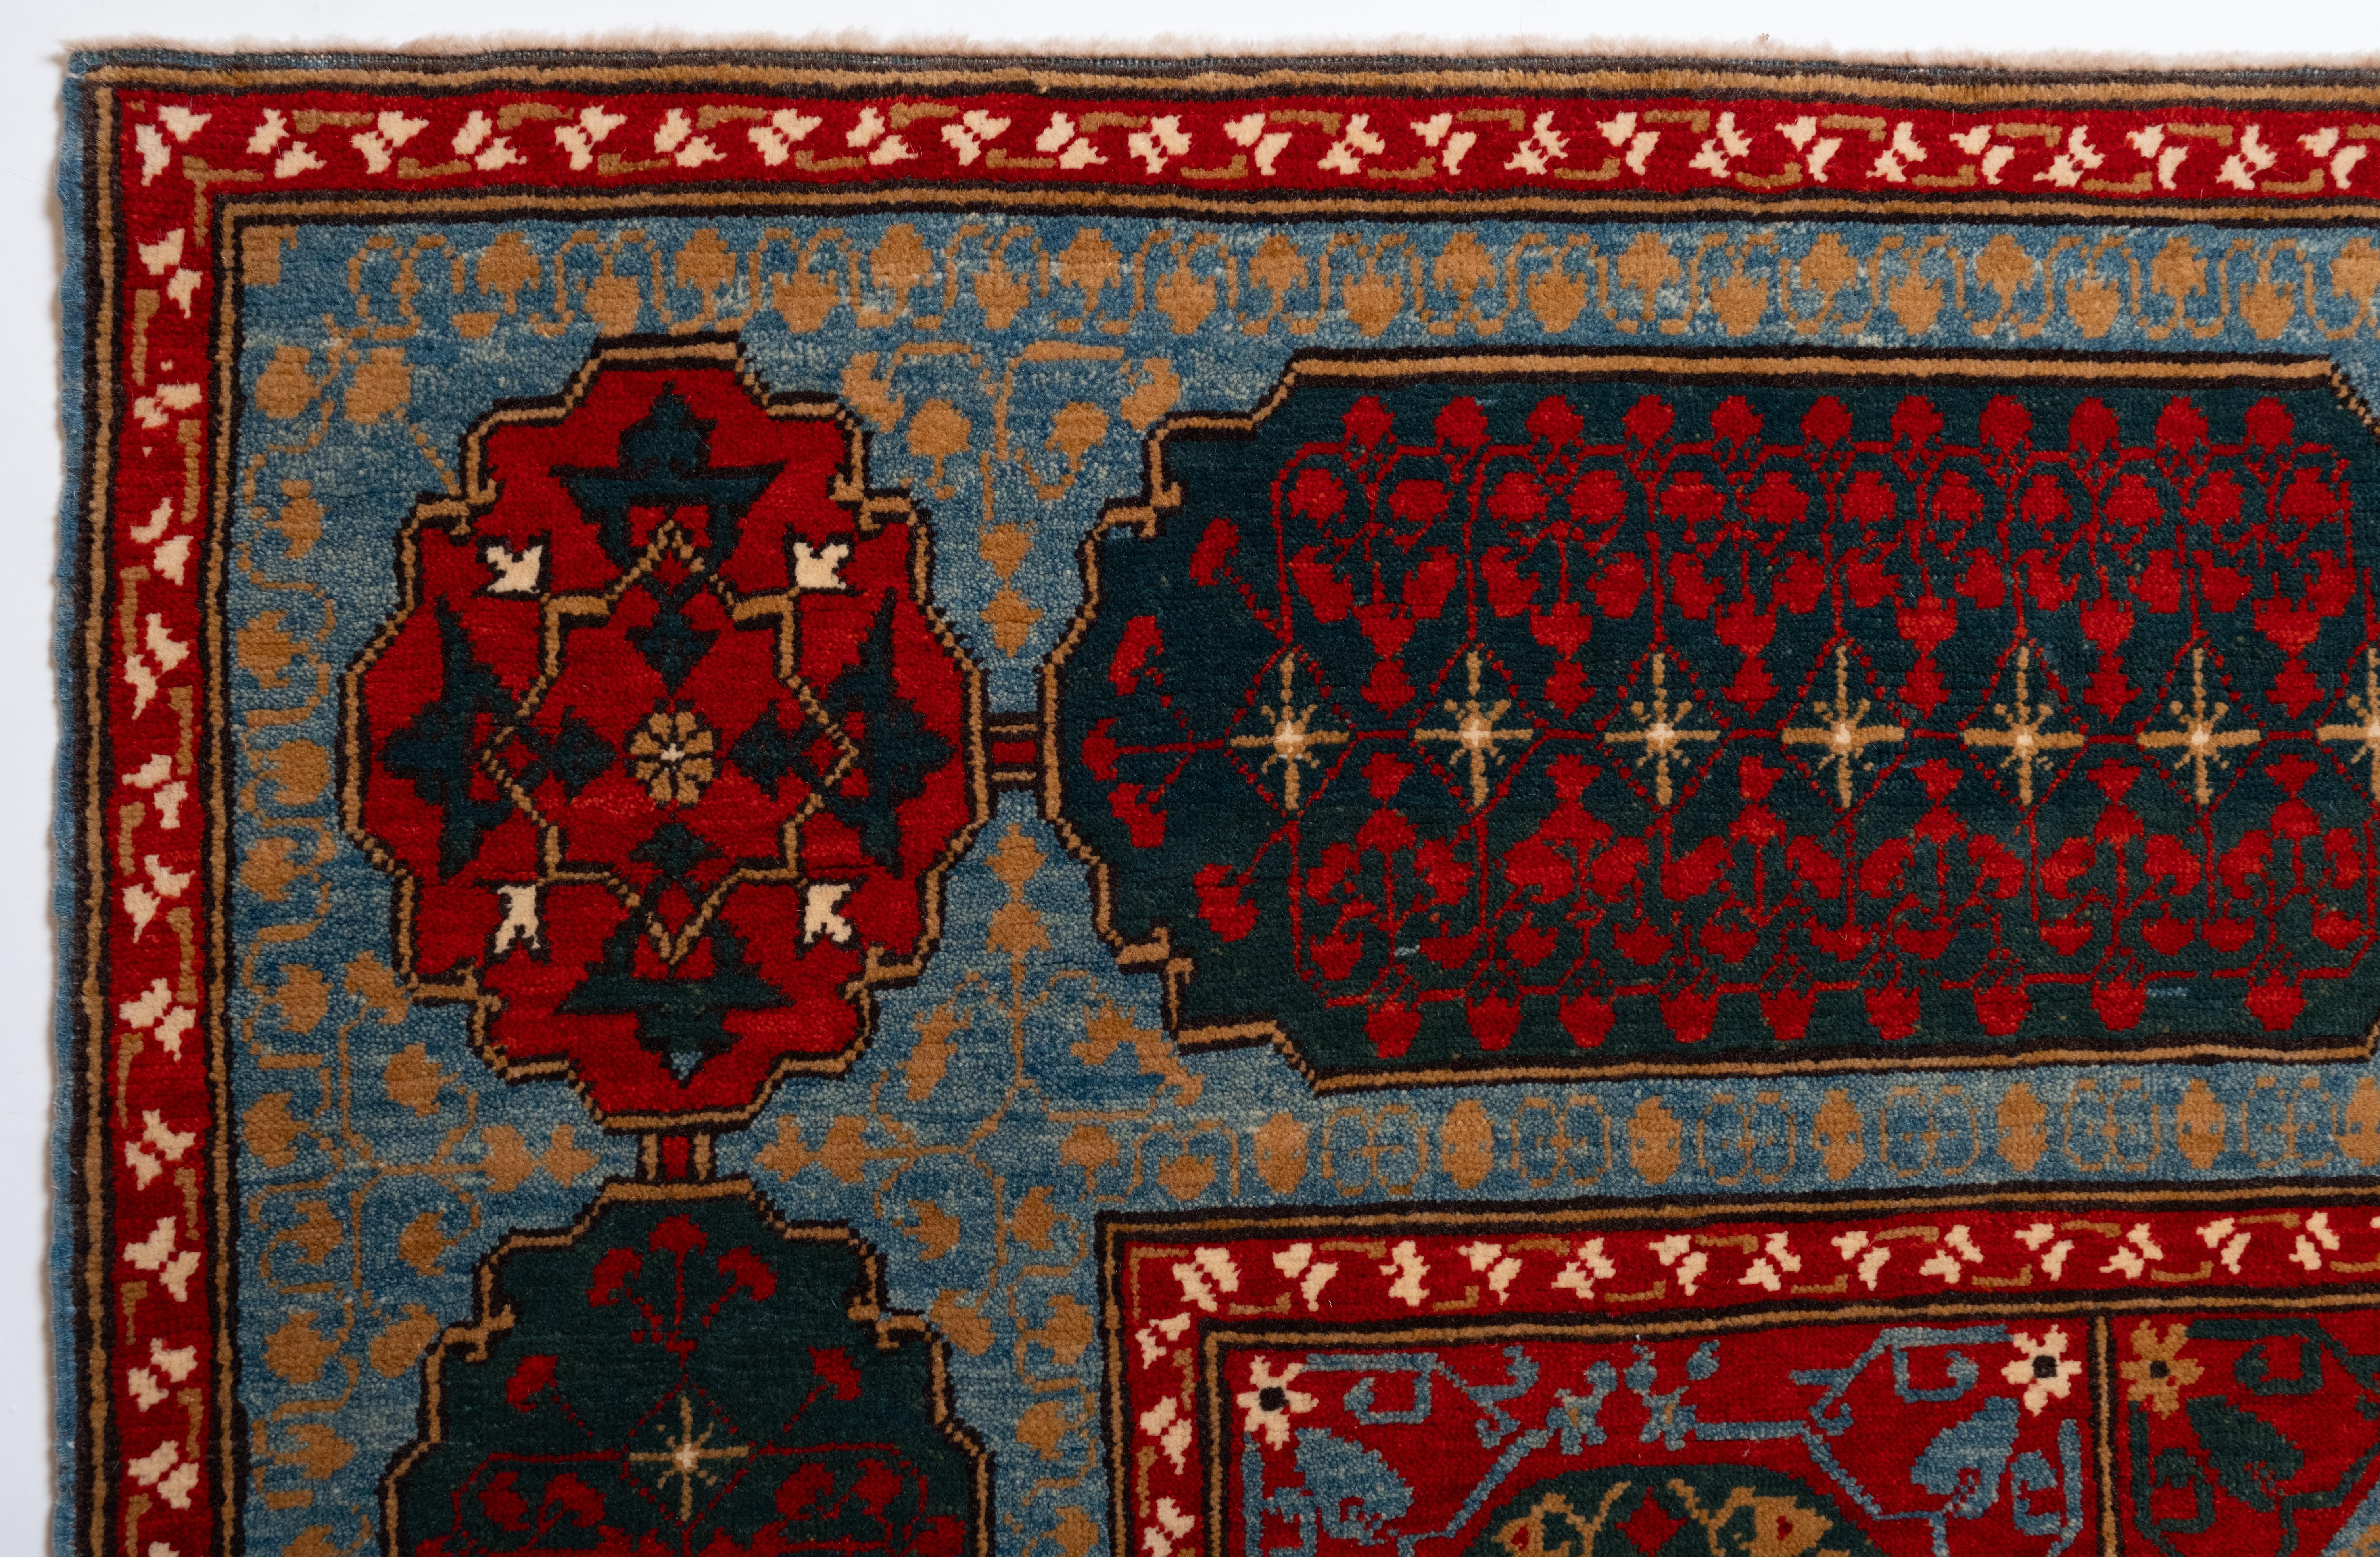 The source of carpet comes from the book How to Read - Islamic Carpets, Walter B. Denny, The Metropolitan Museum of Art, New York 2014 fig.61,62. The five-star-medallion carpet was designed in the early 16th century by Mamluk Sultane of Cairo,